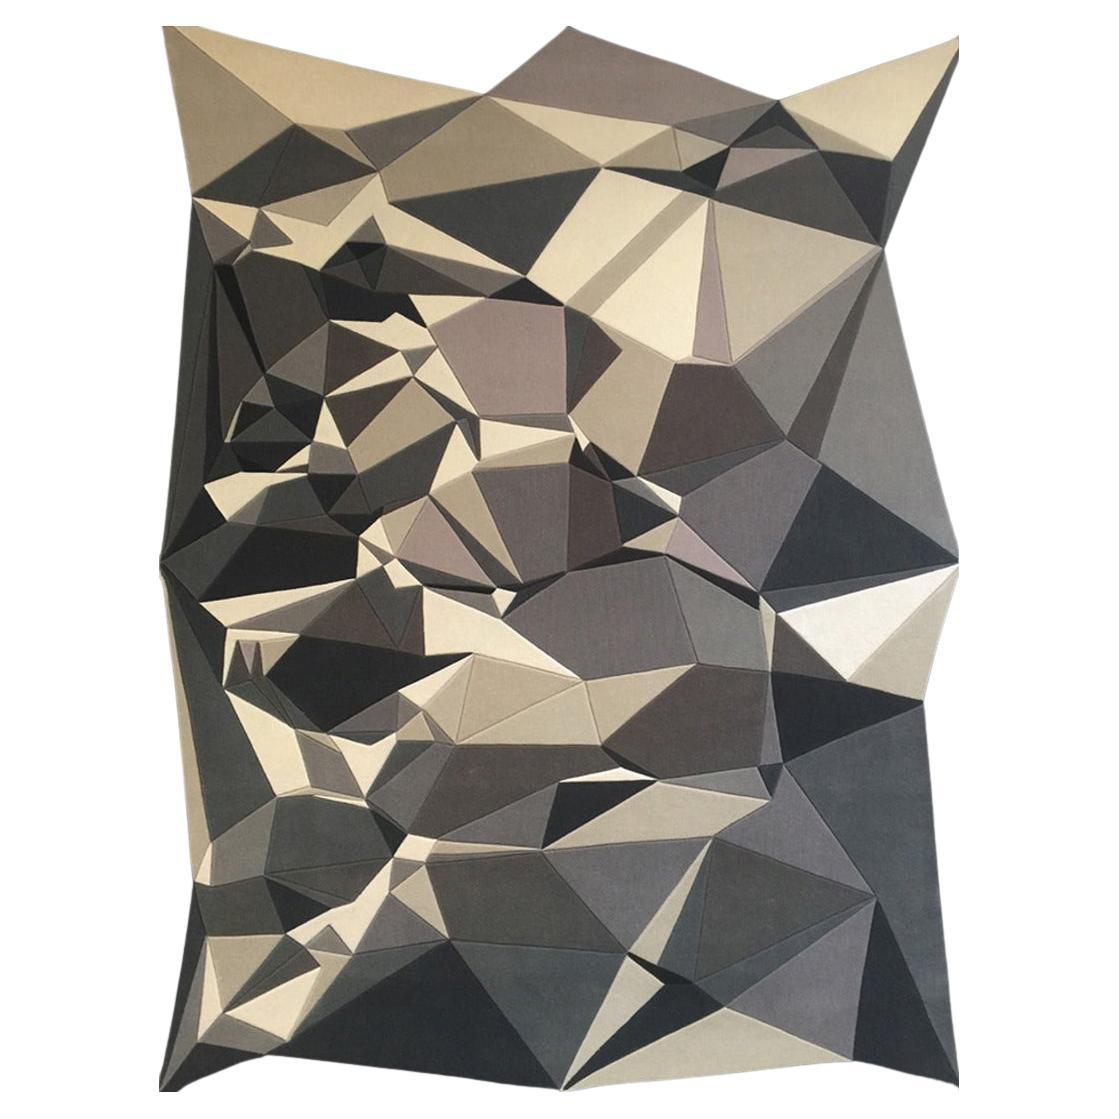 Using triangulated forms in its composition, this Origami-like pattern expertly takes hand-carved, bold colors to create jewel-like prisms in varying, enchanting sizes.

Erik Lindstrom offers a curated selection of contemporary, transitional, and